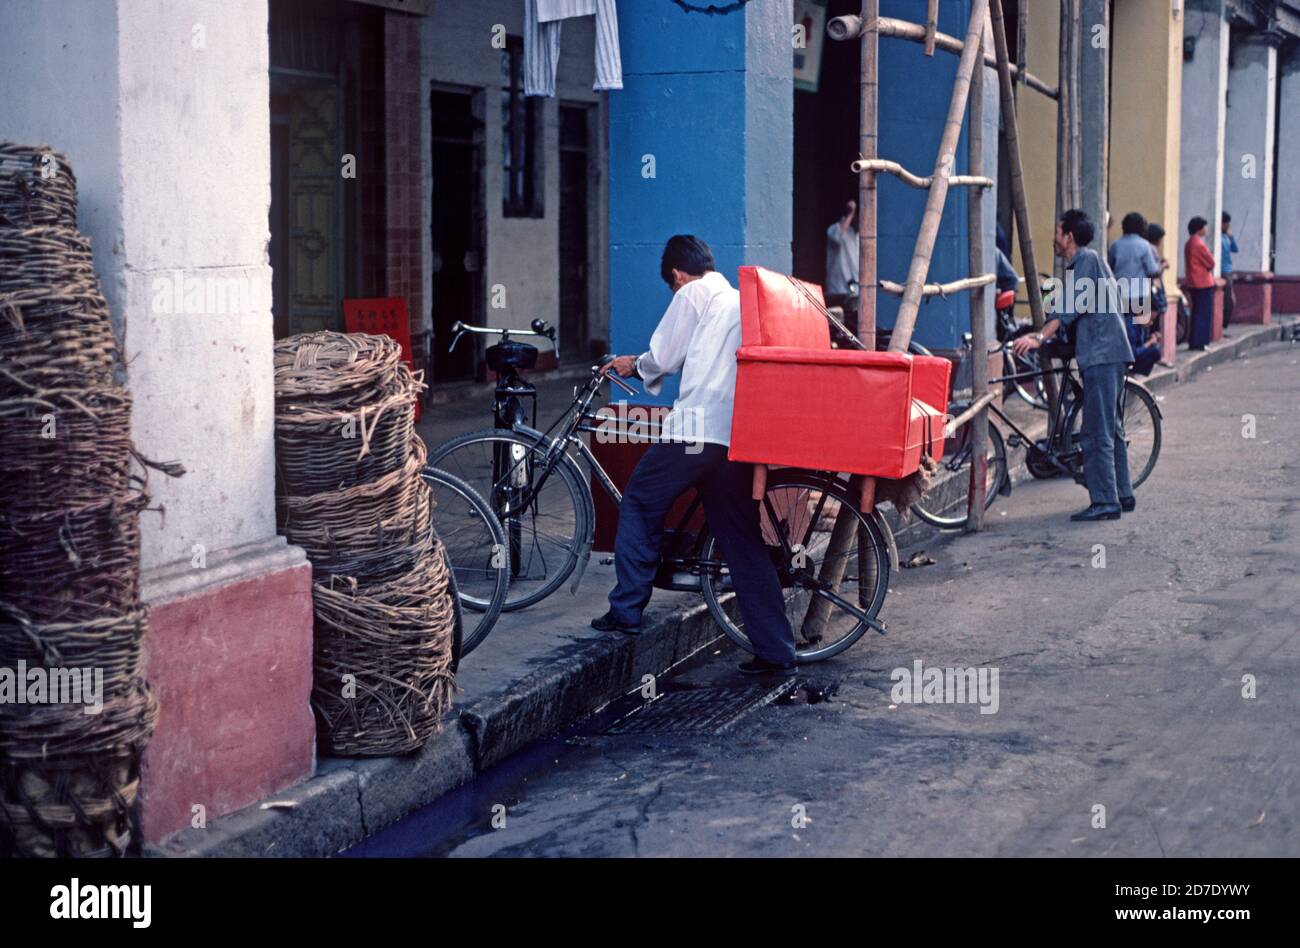 Carrying red chair on bycycle, Nanking, China, 1980s Stock Photo